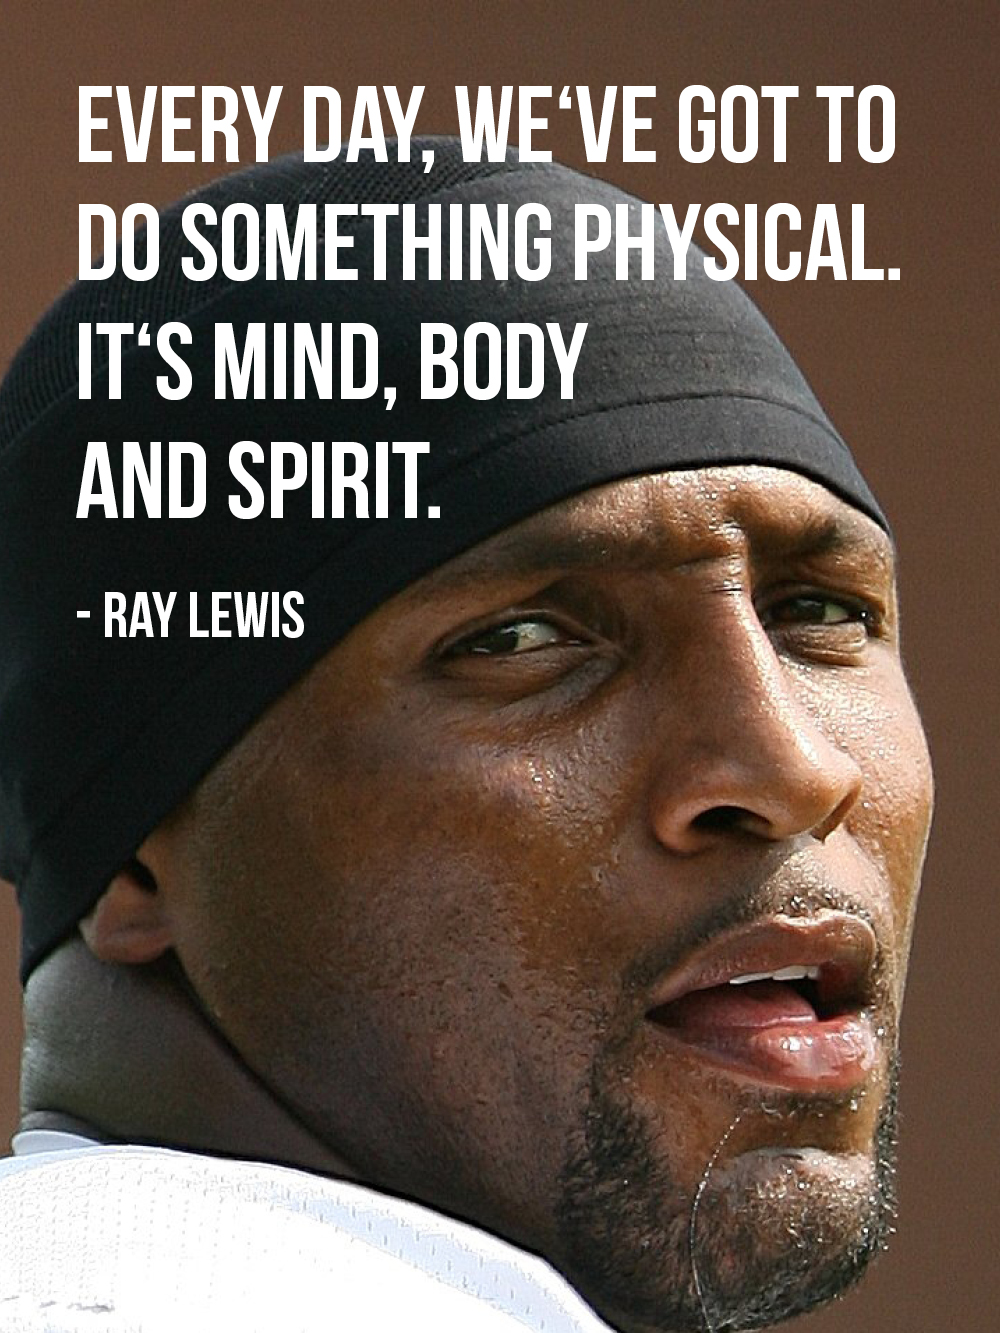 Ray Lewis Good Quotes. QuotesGram